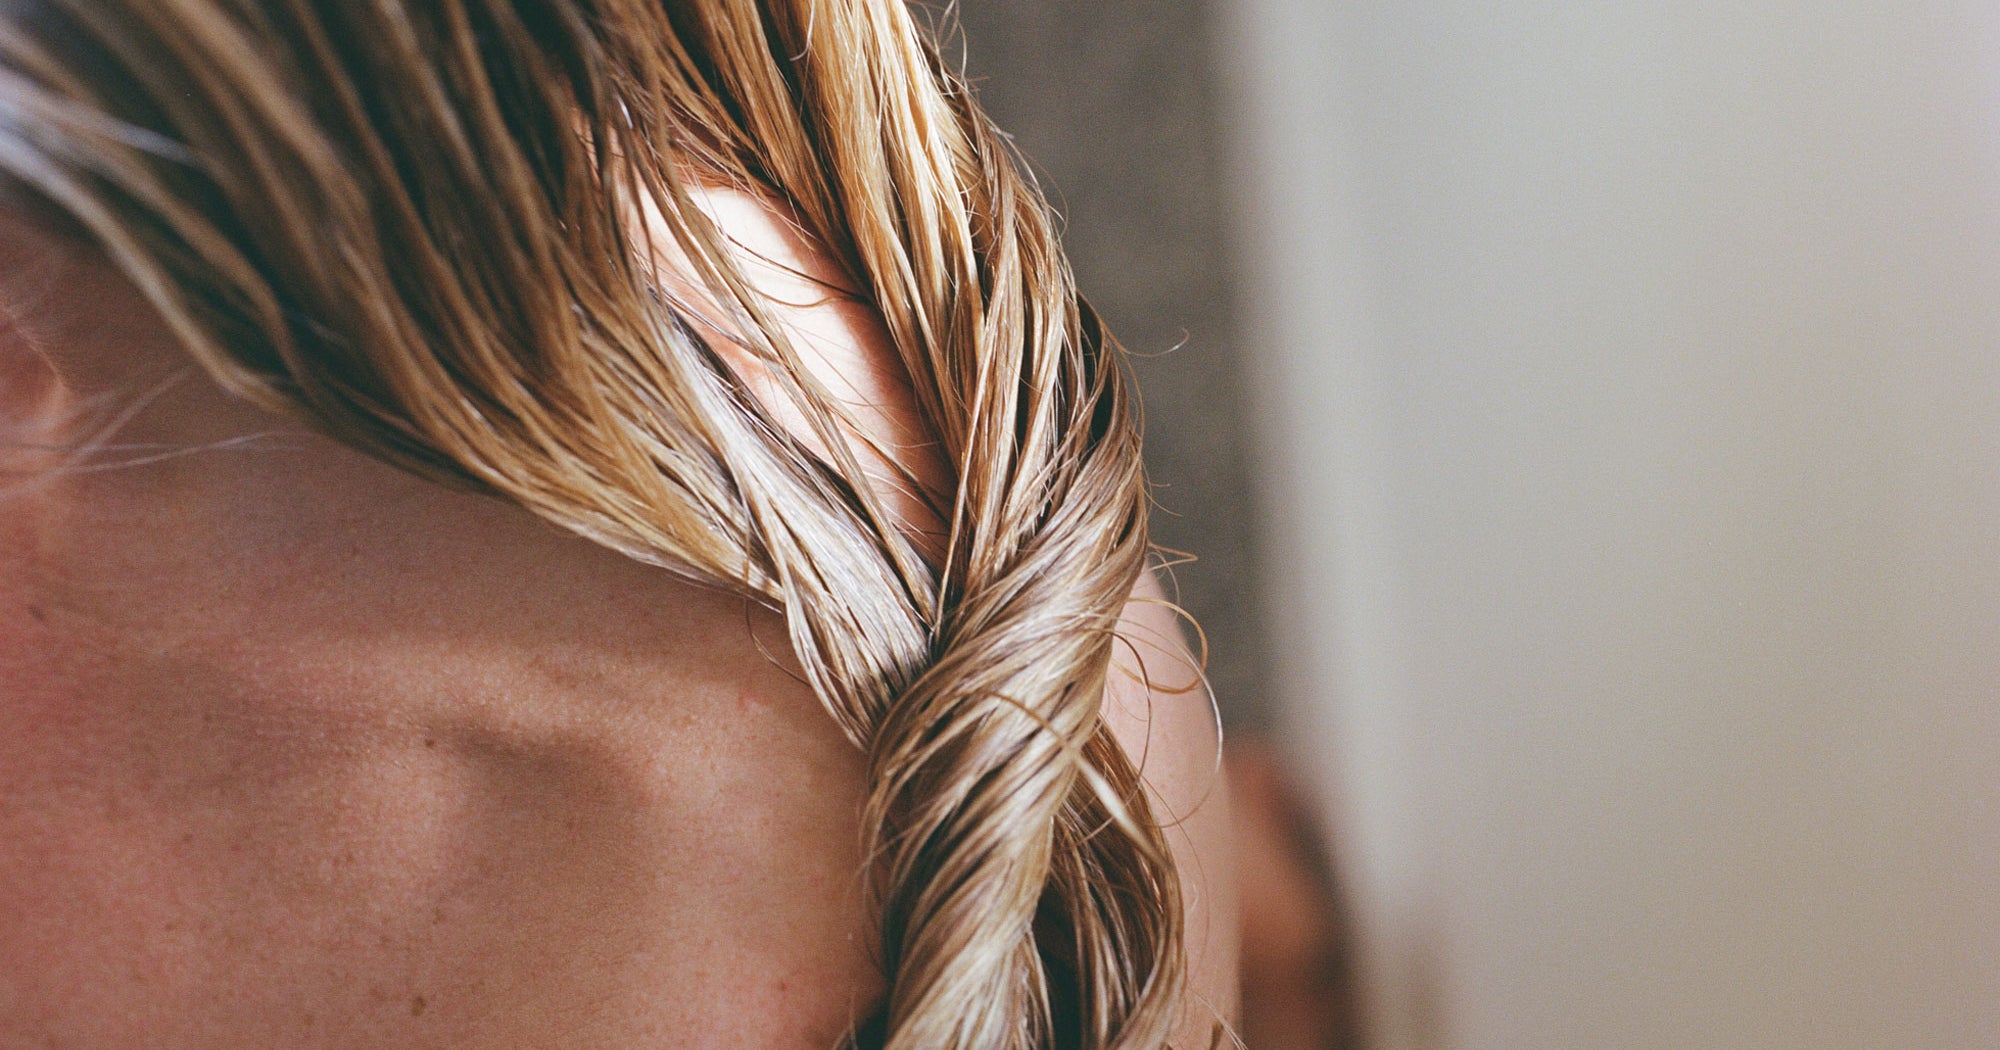 Should You Wash Your Hair After Every Workout? Here’s What Derms Think